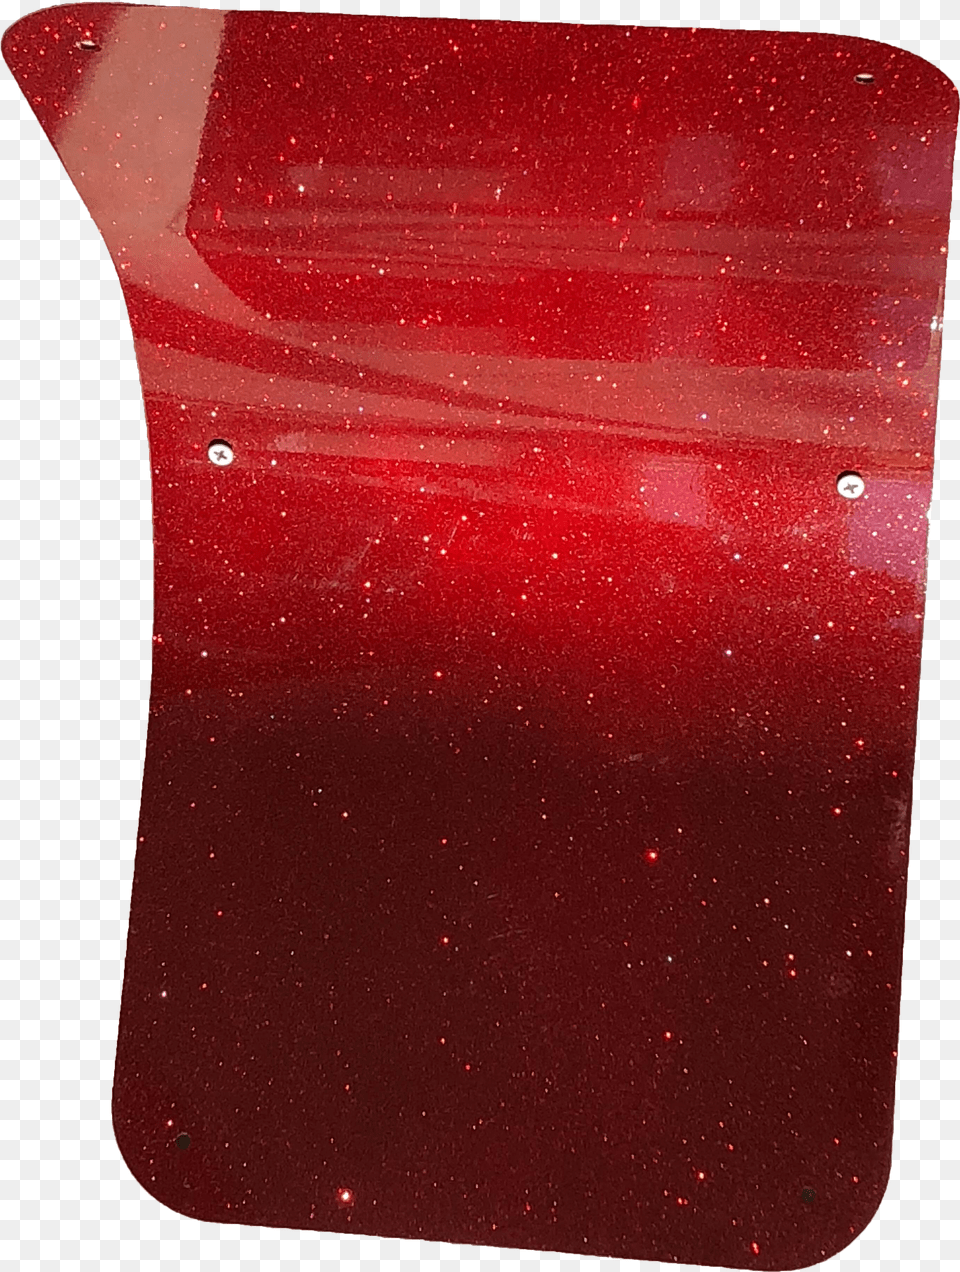 Red Sparkle Puckchesskey Ramp Platter Png Image